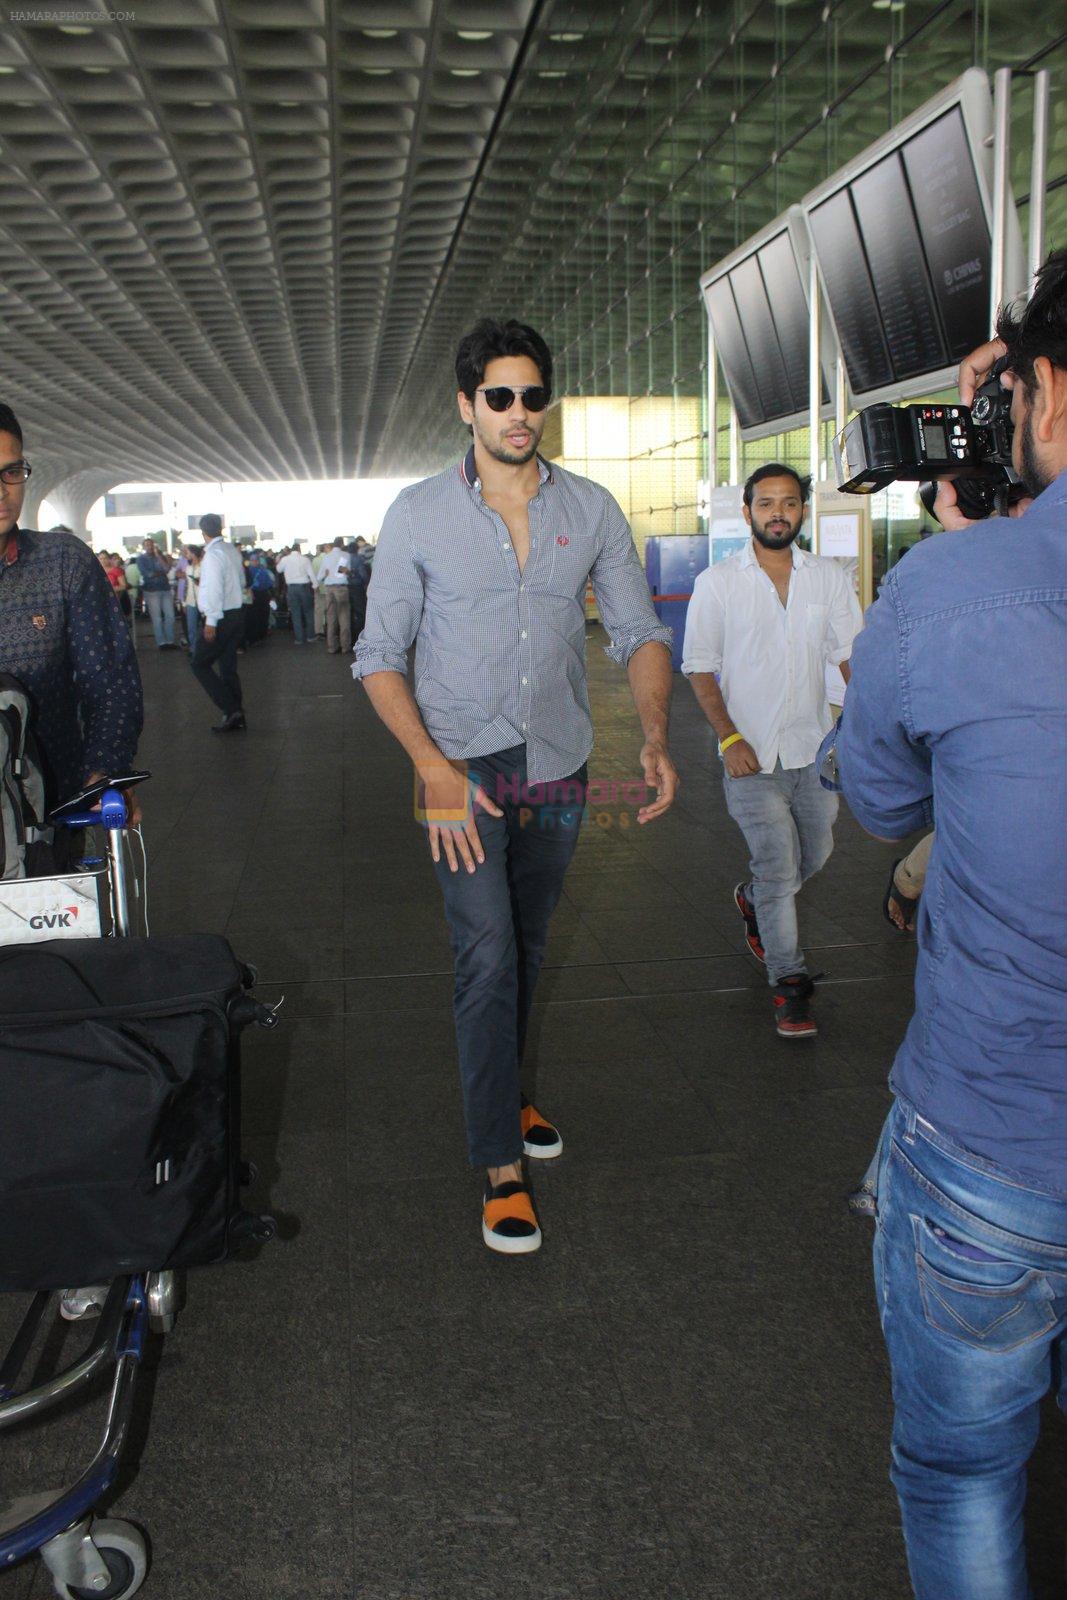 Sidharth Malhotra snapped at airport on 21st March 2016